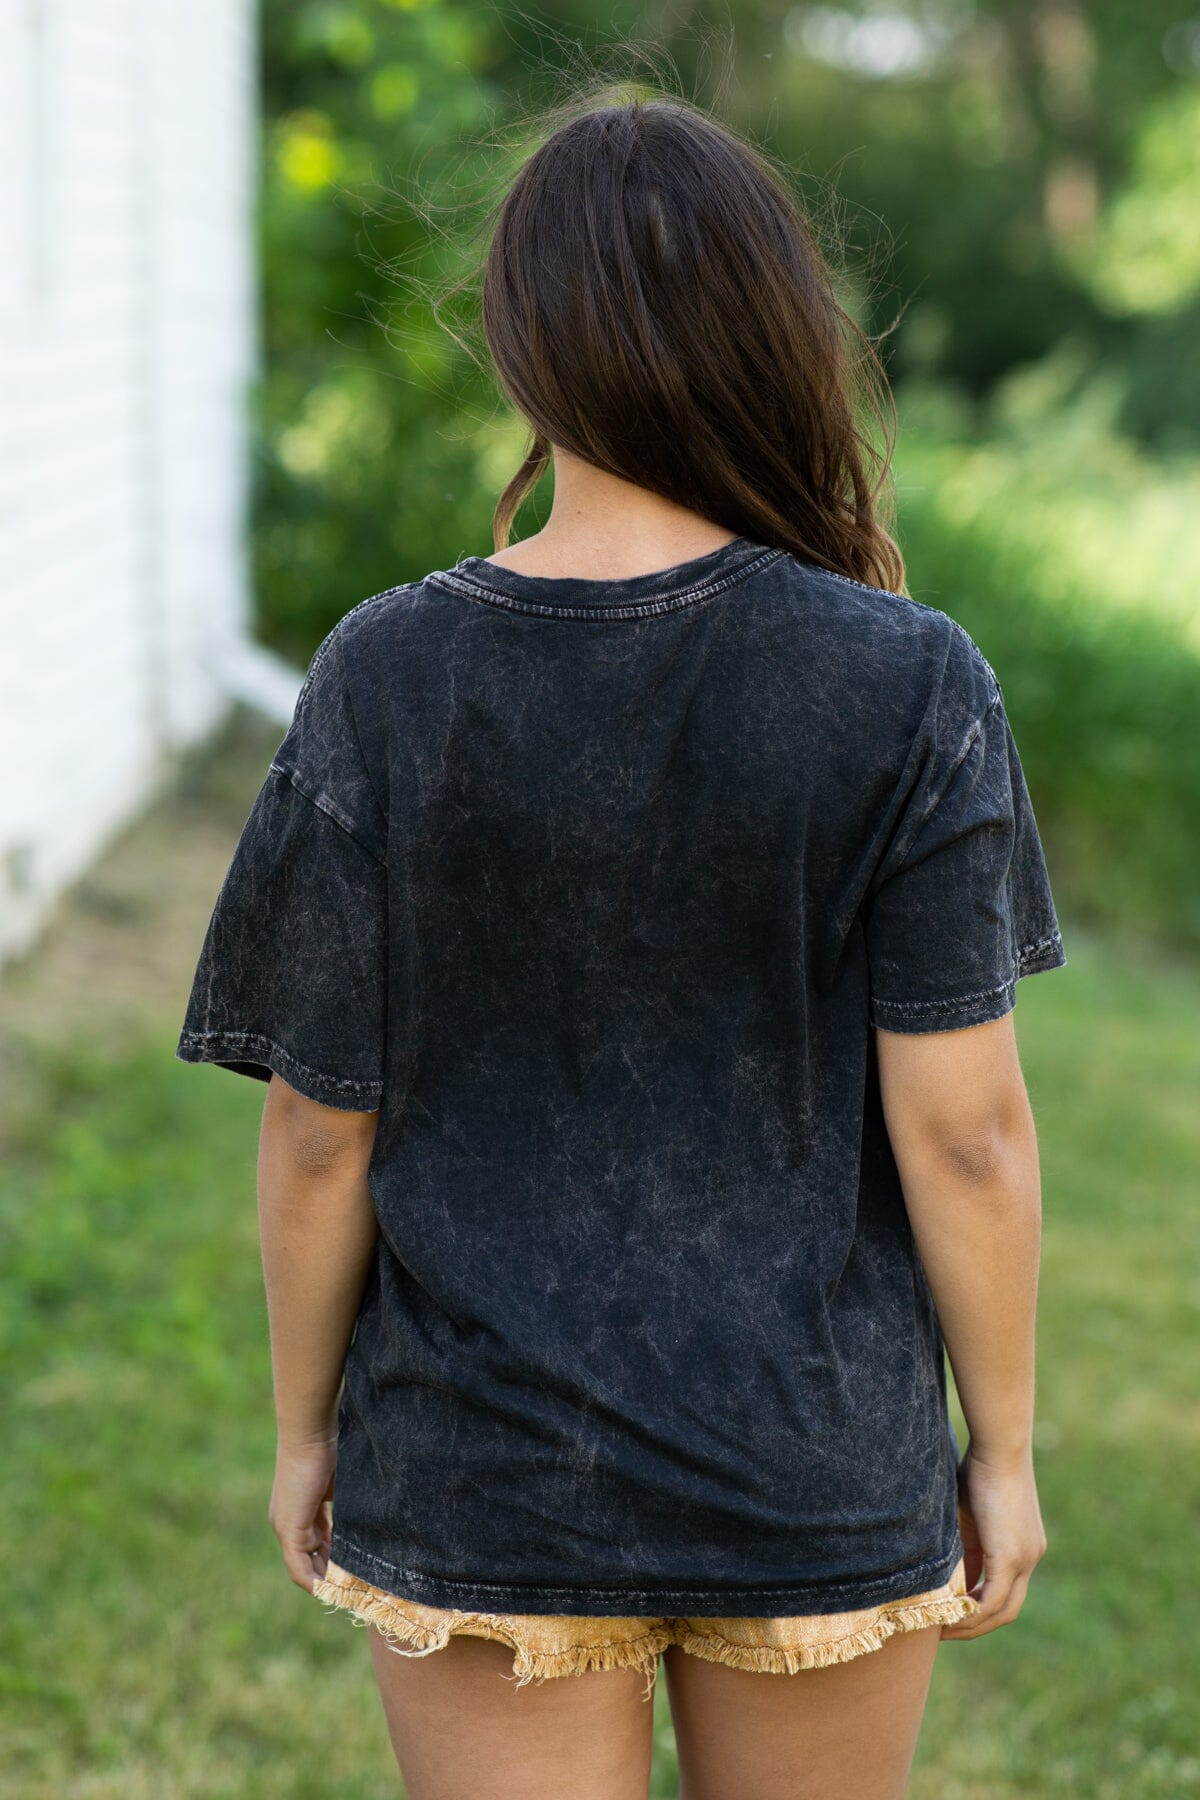 Black Washed Yosemite Park Graphic Tee - Filly Flair